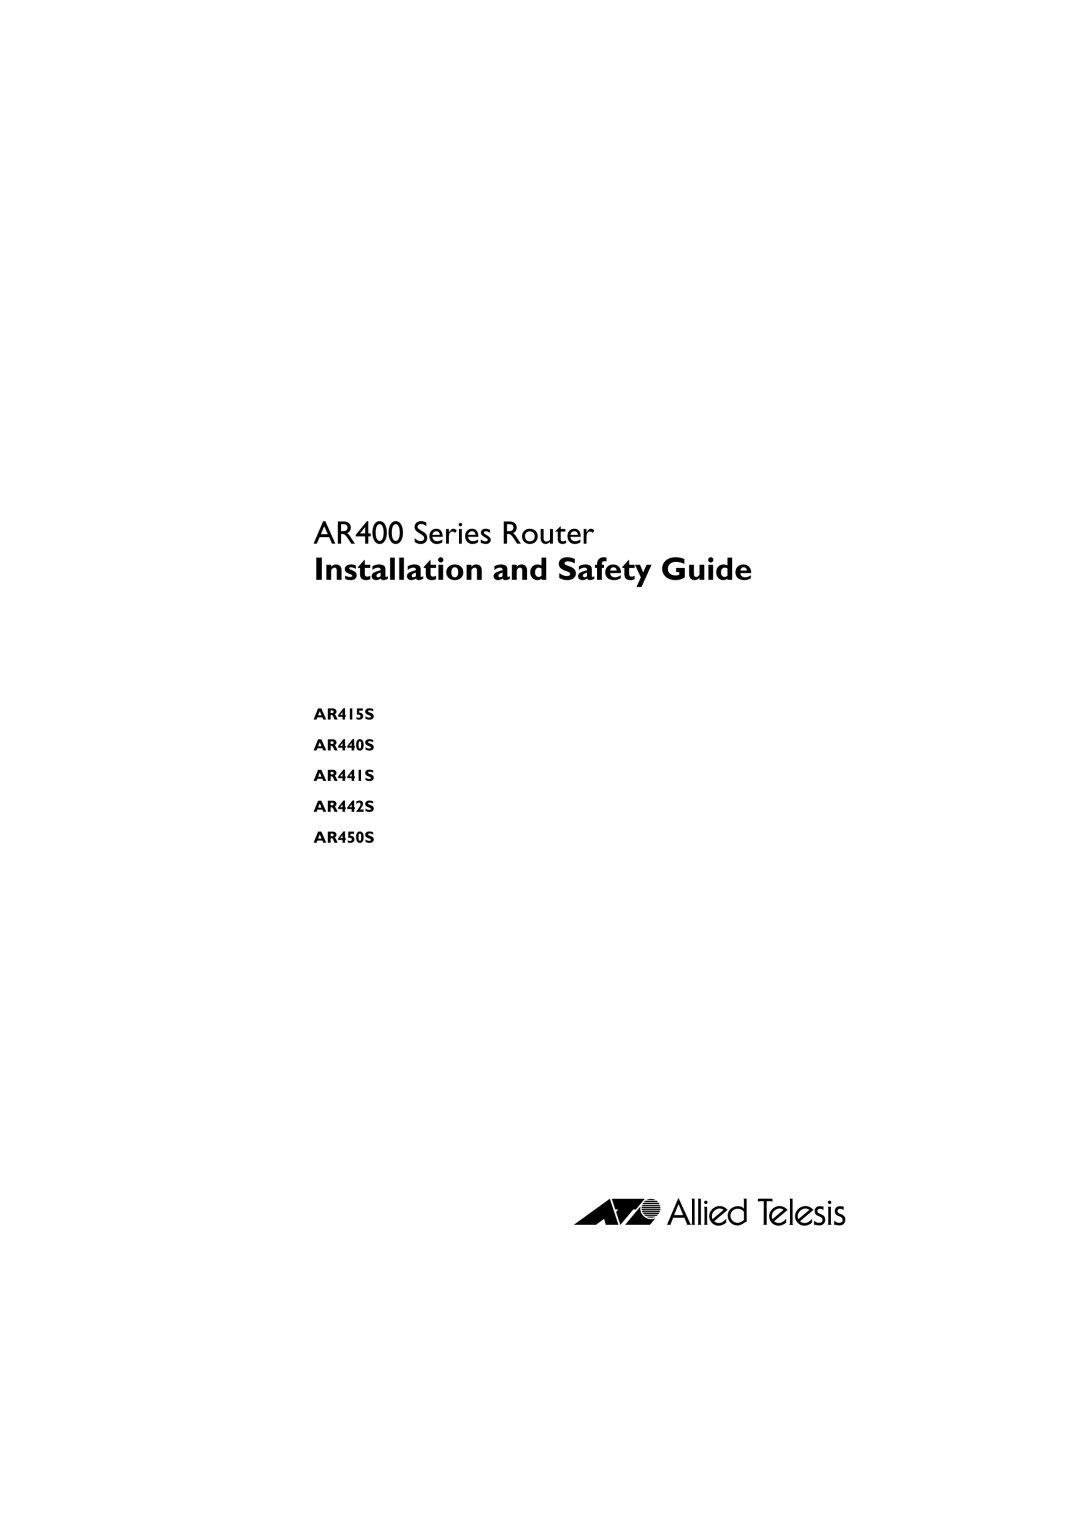 Allied Telesis manual AR415S AR440S AR441S AR442S AR450S, AR400 Series Router, Installation and Safety Guide 